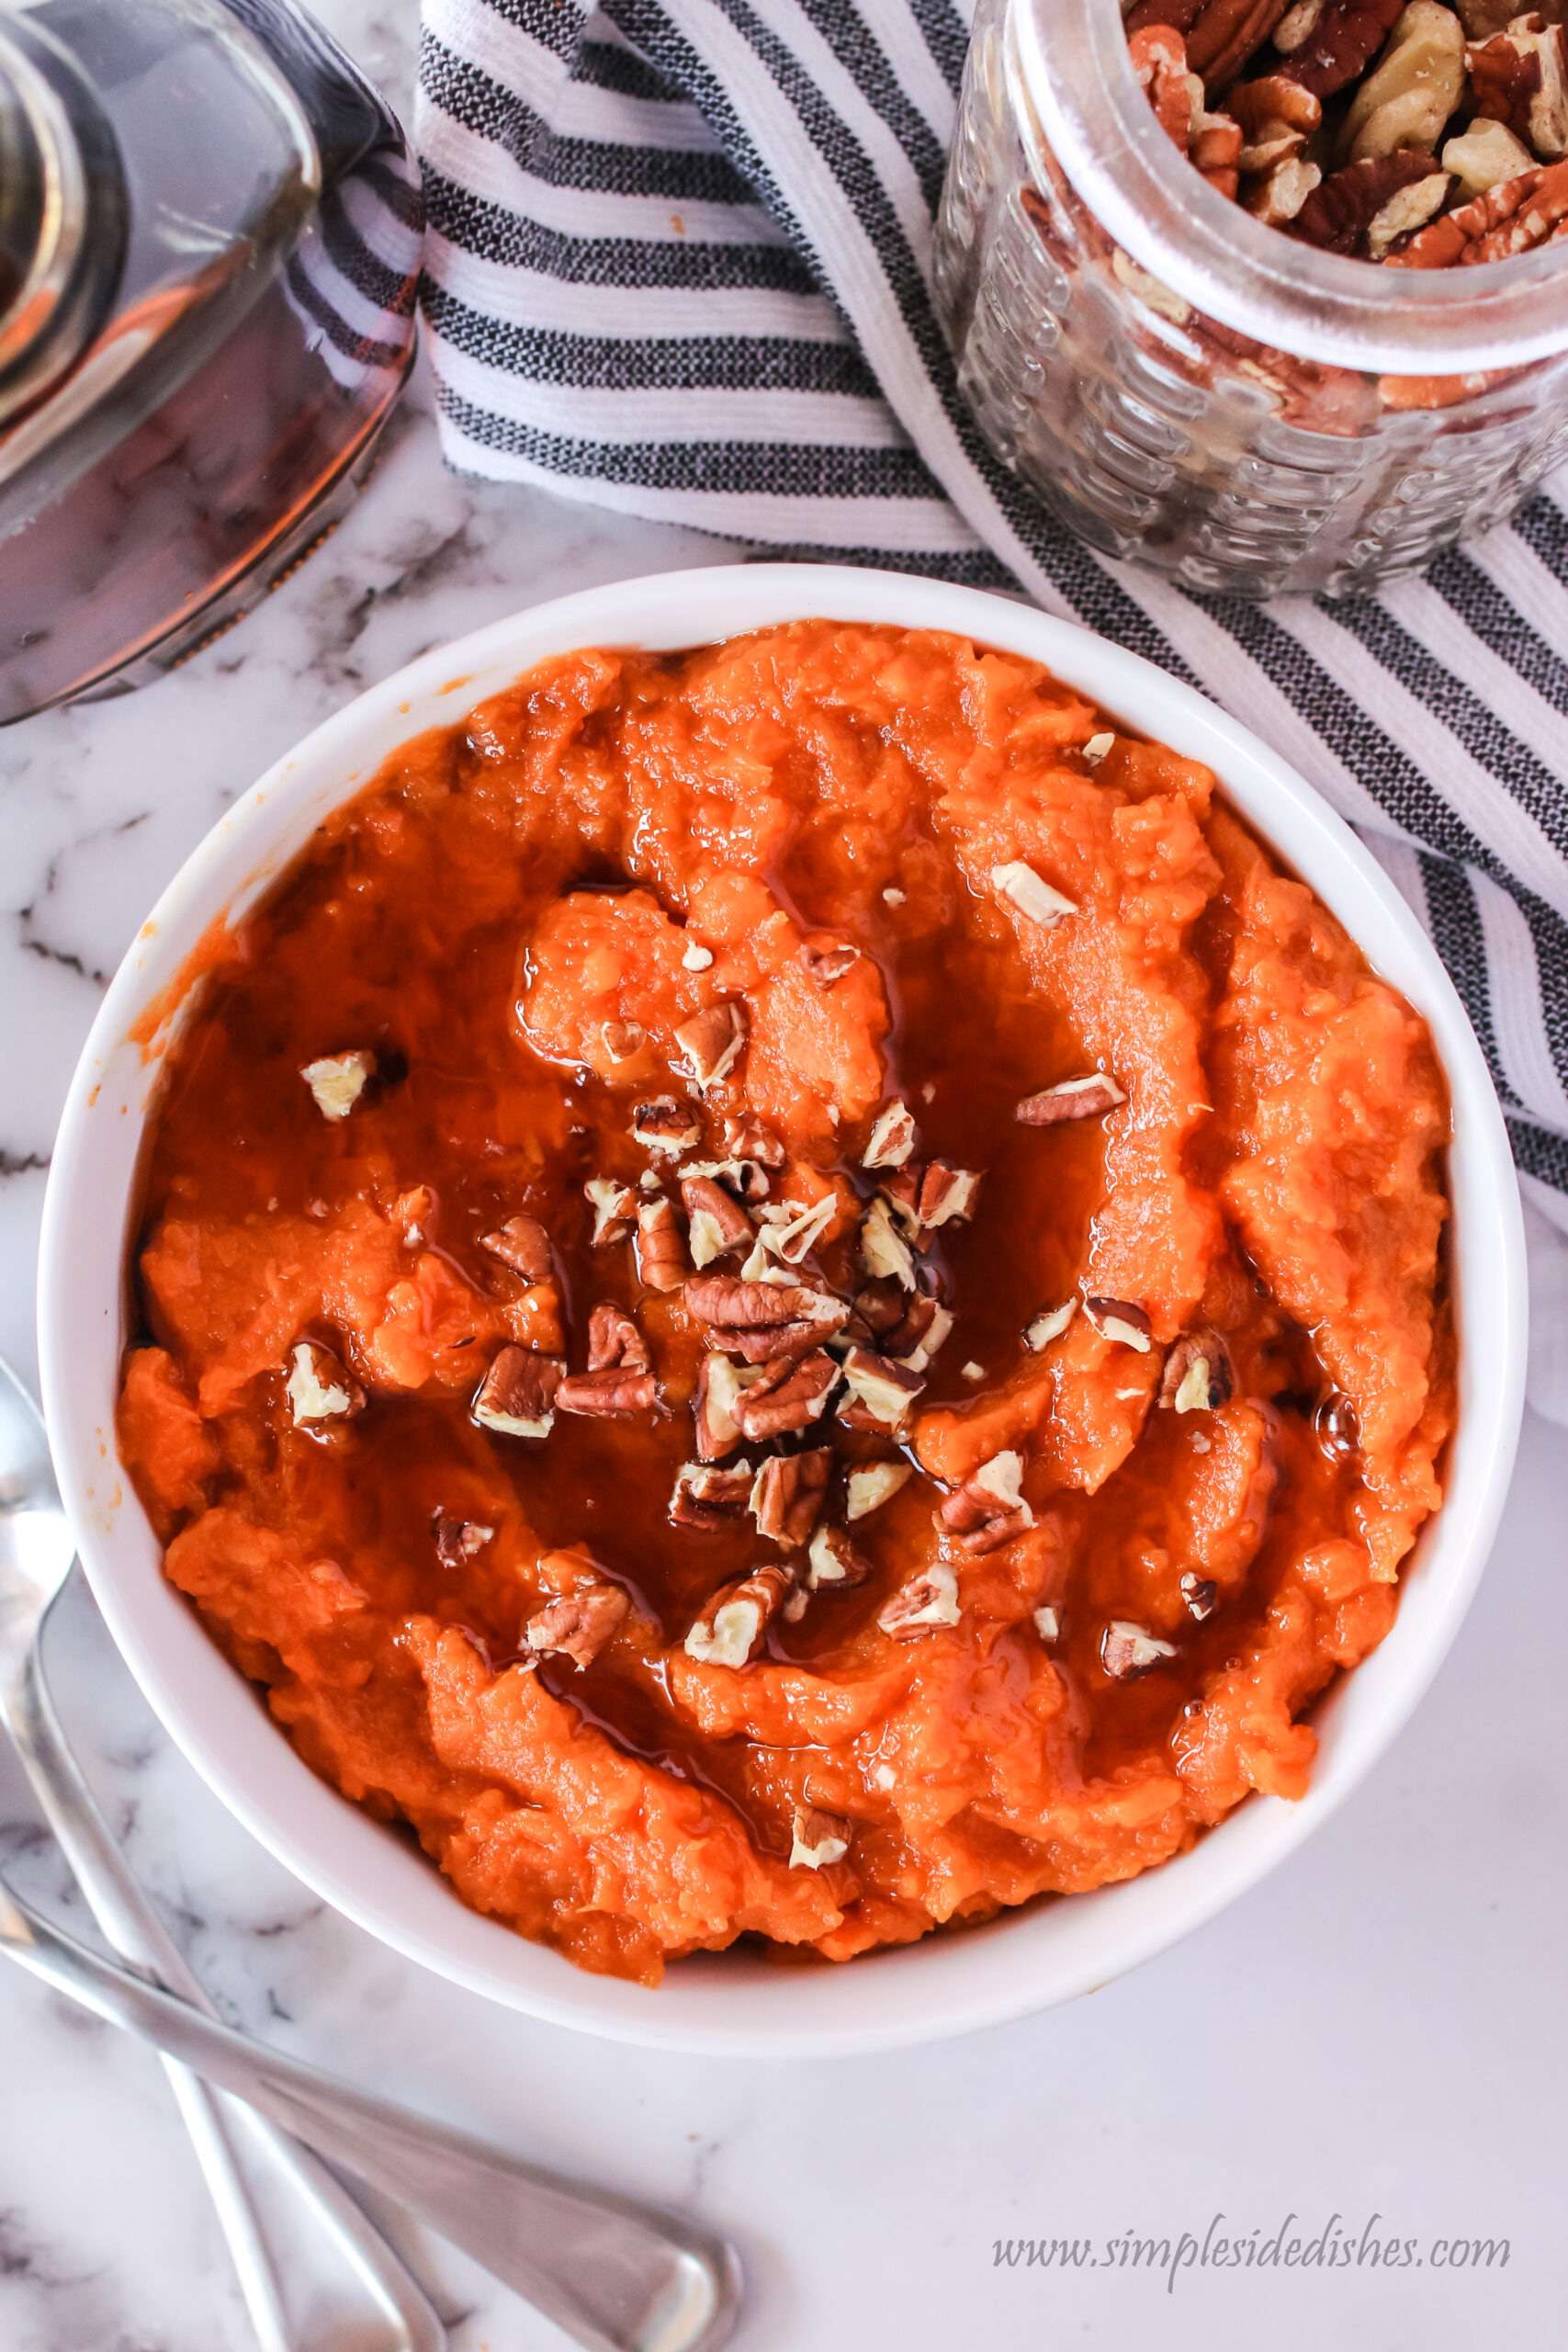 Pecans sprinkled on top of mashed sweet potatoes and maple syrup